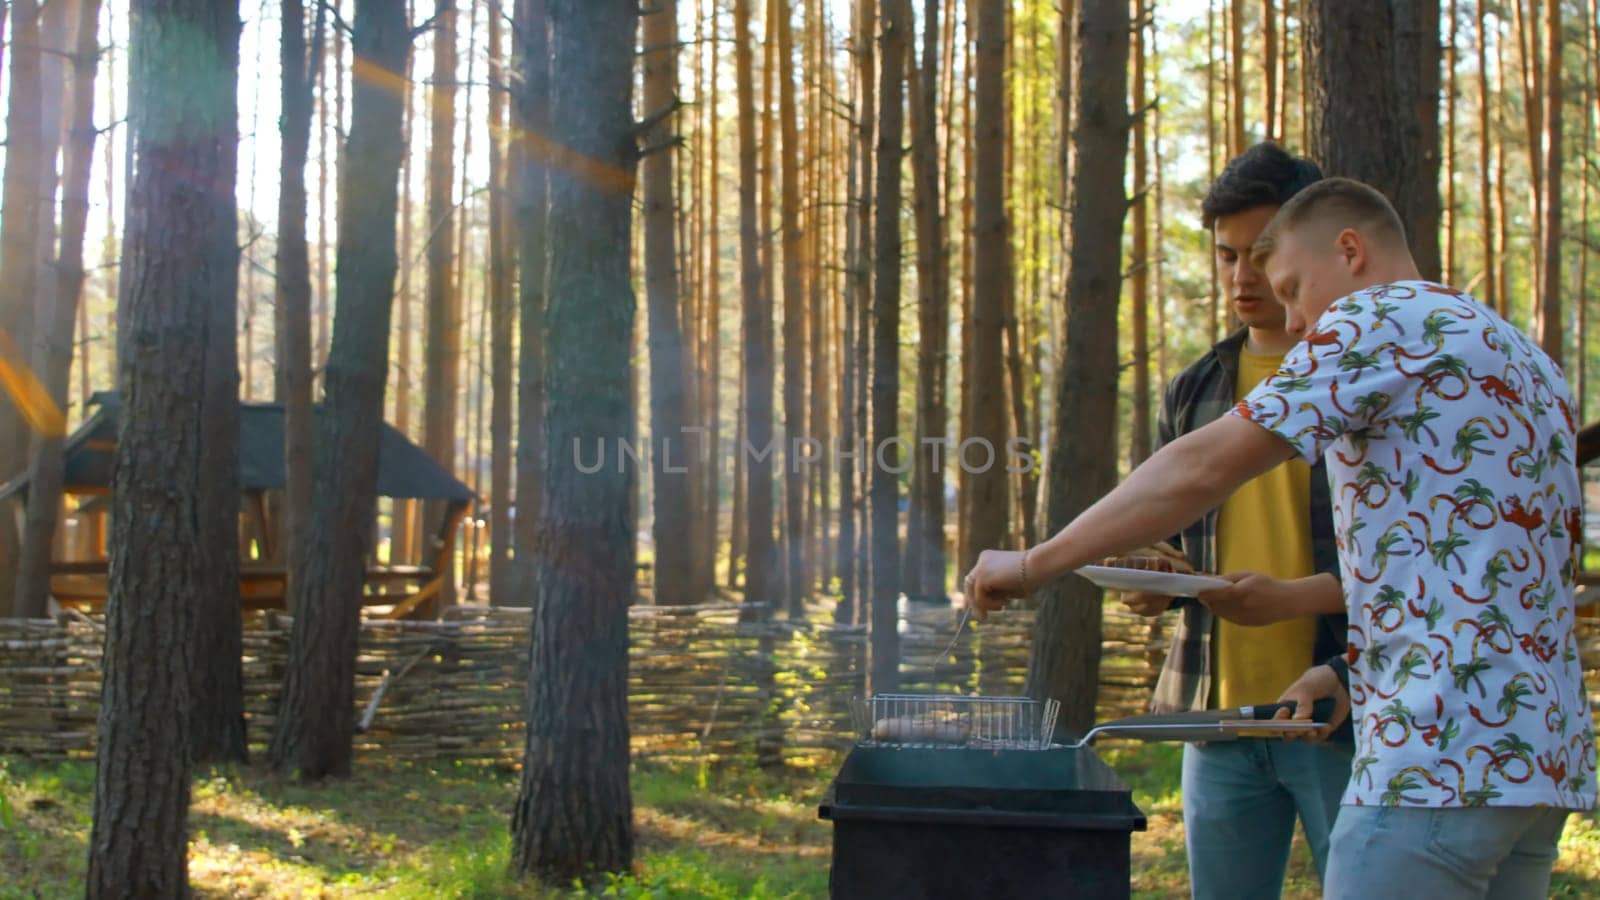 Men put barbecue on plate in nature. Stock footage. Men cooked sausages on grill in forest on sunny summer day. Men put barbecue meat on plate in nature.